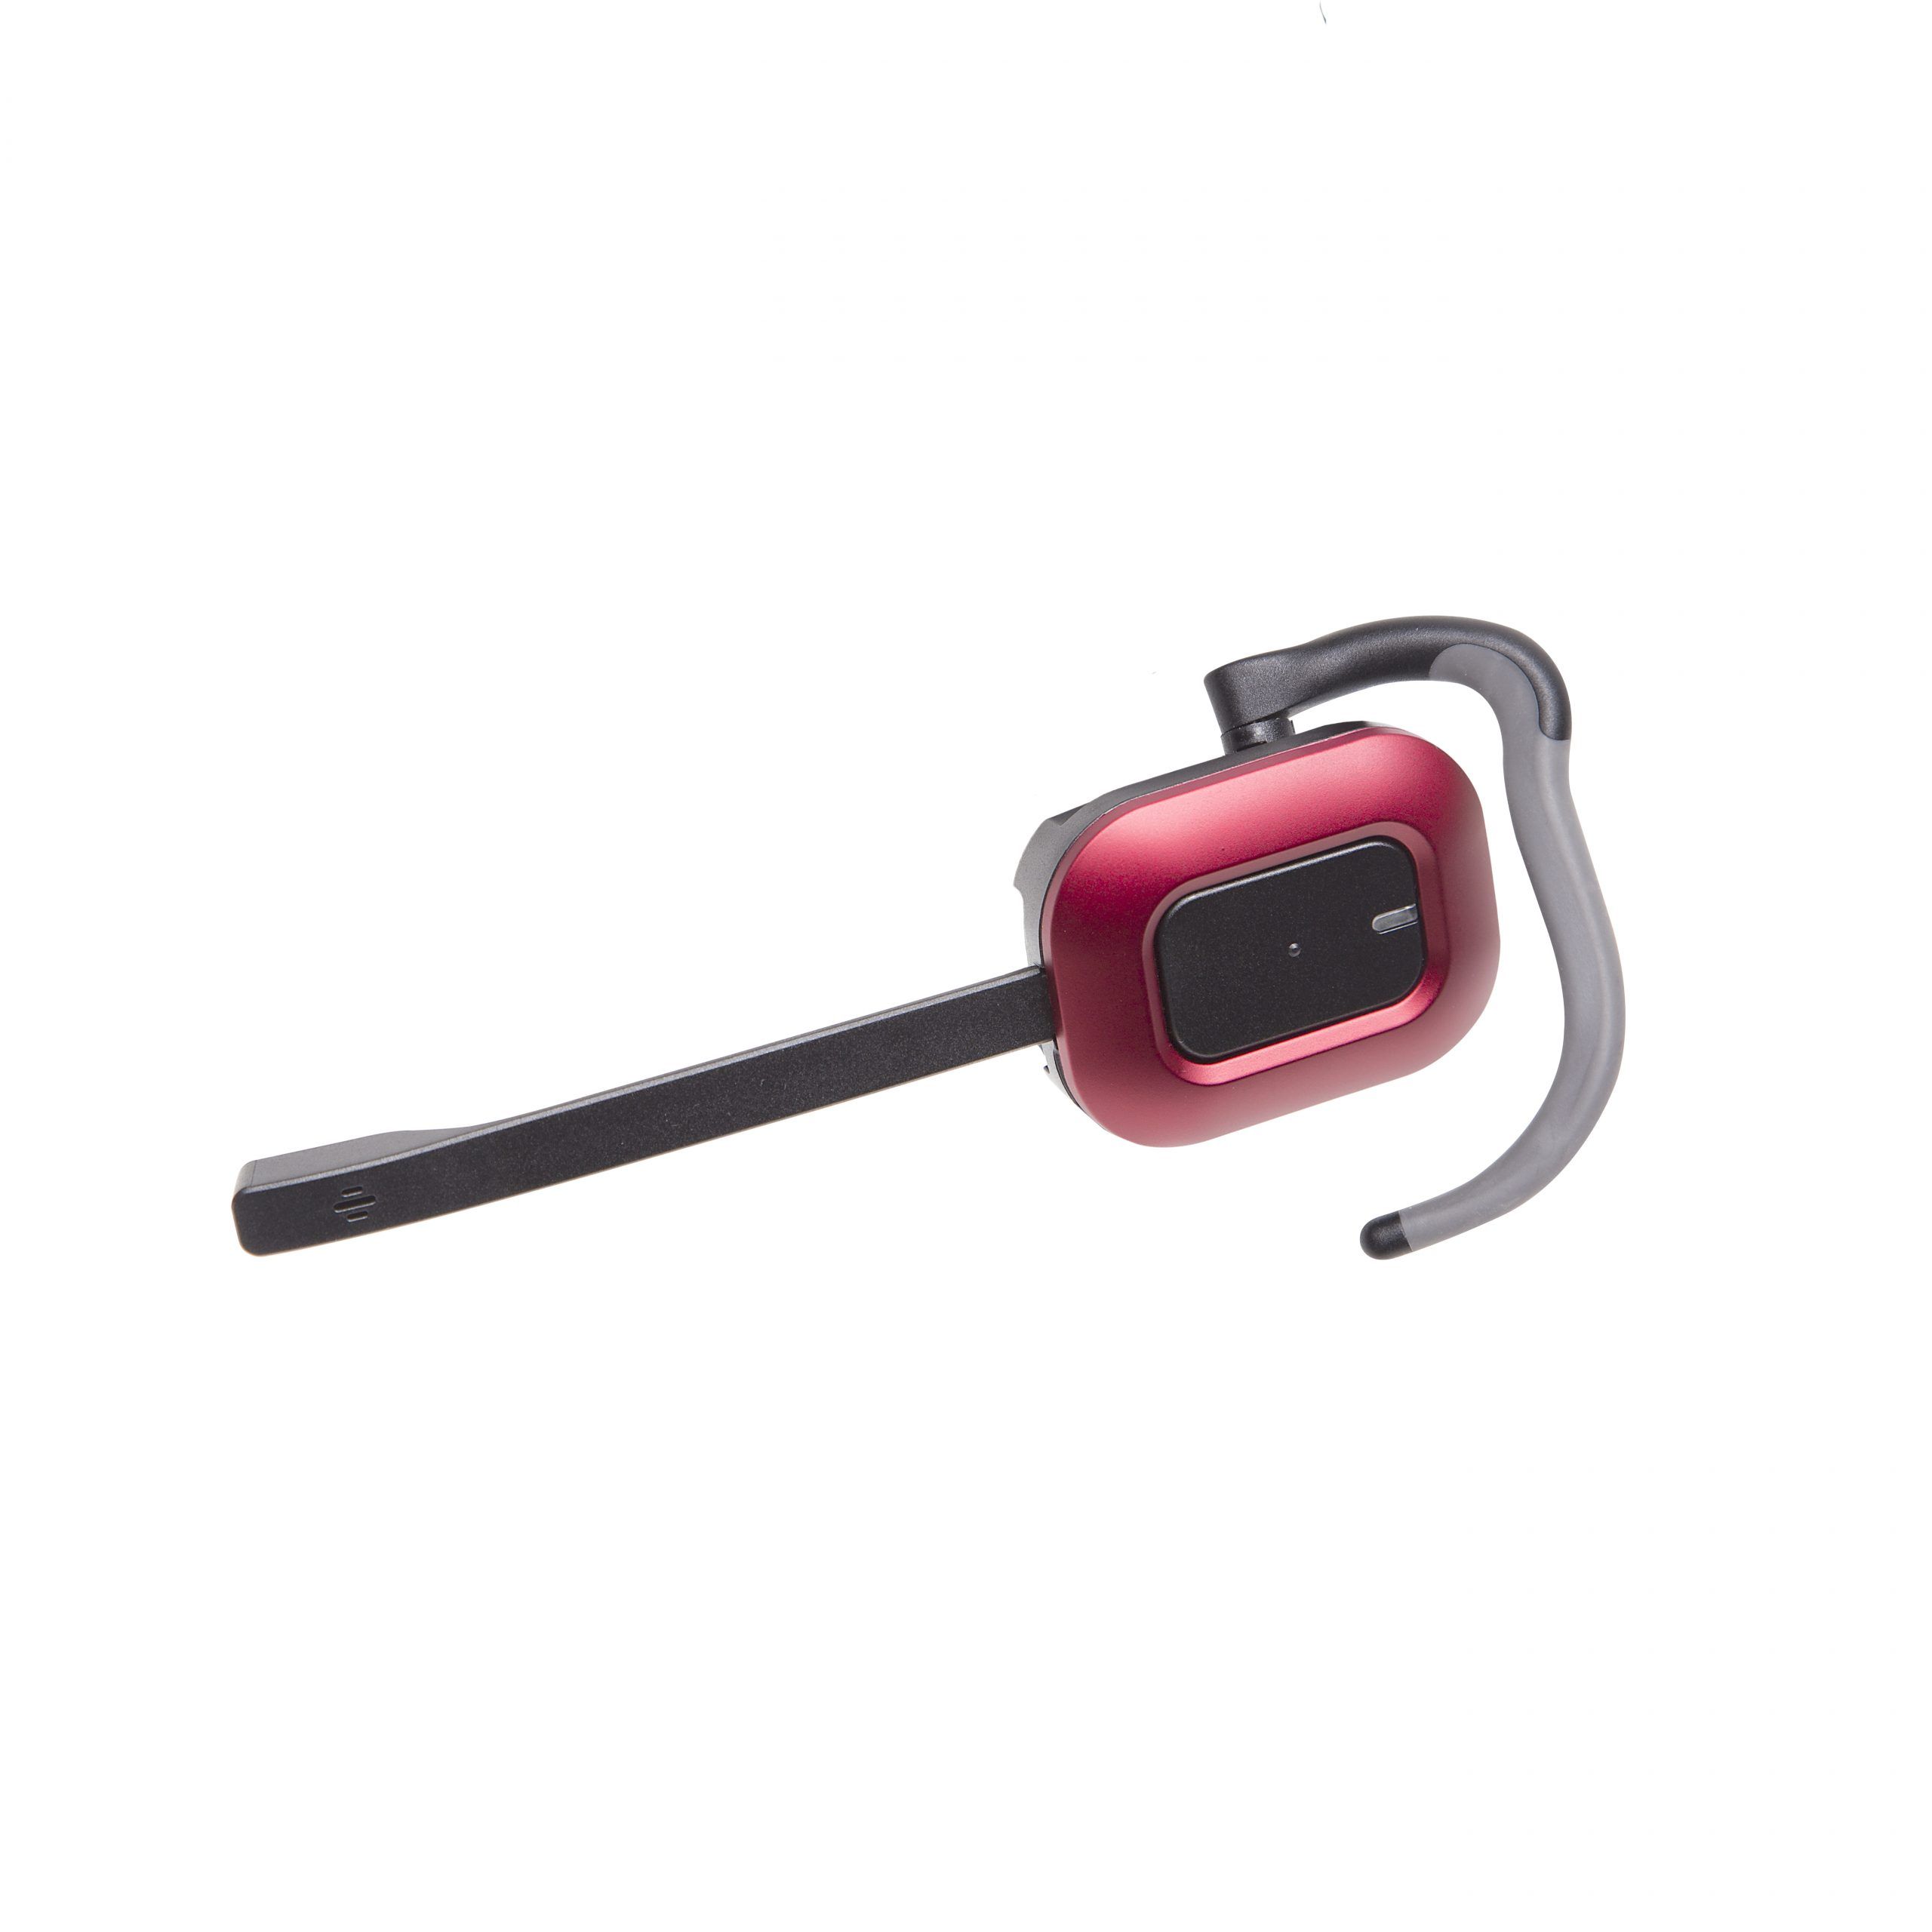 3012 odyssey xii 1. 9 ghz dect wireless headset for direct connect telephones 3012 hs. Earloop red scaled